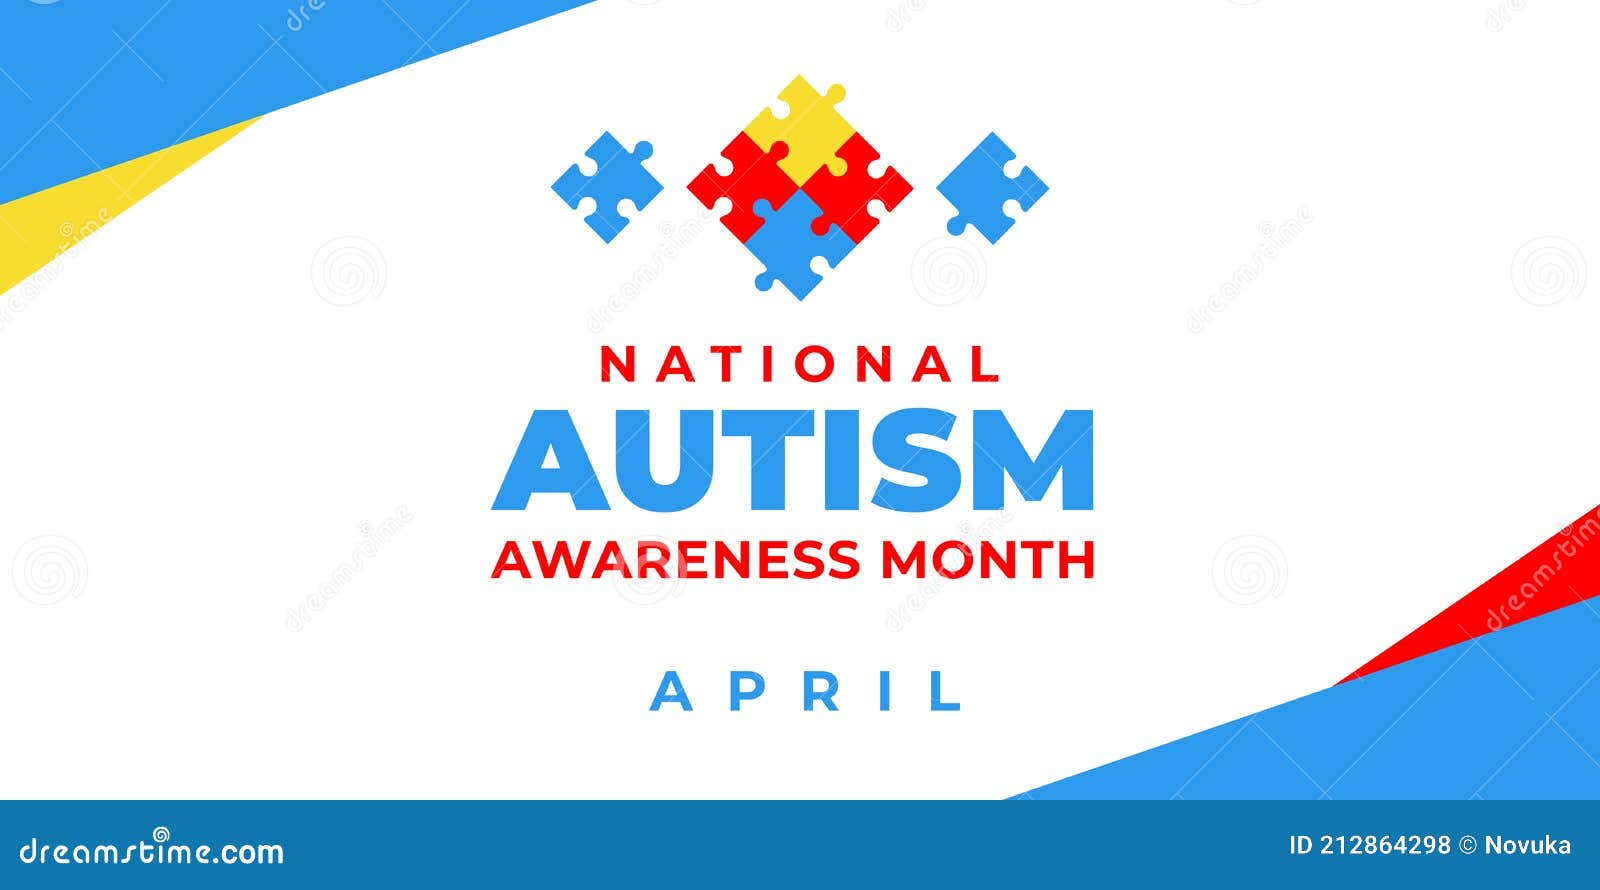 national autism awareness month.  banner, poster, flyer, greeting card for social media with the text national autism